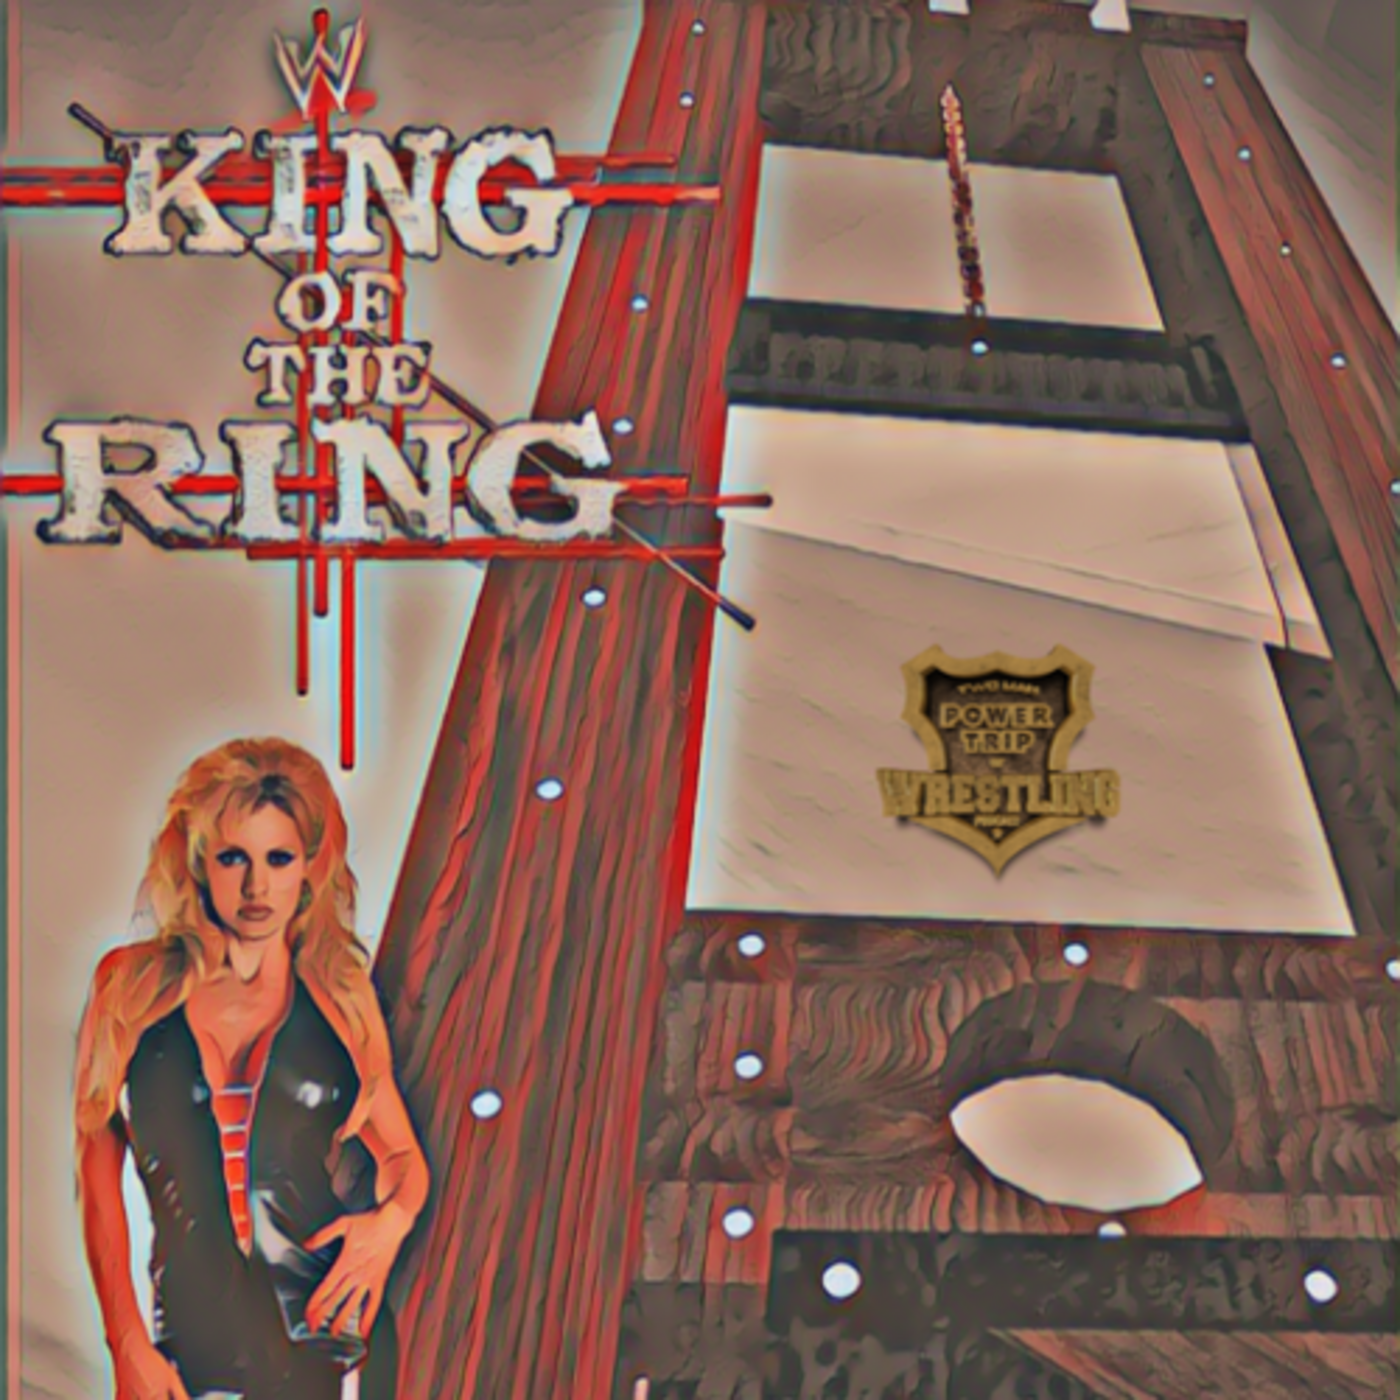 Episode 4: POZCAST - WWF King of the Ring 1998 with Vince Russo